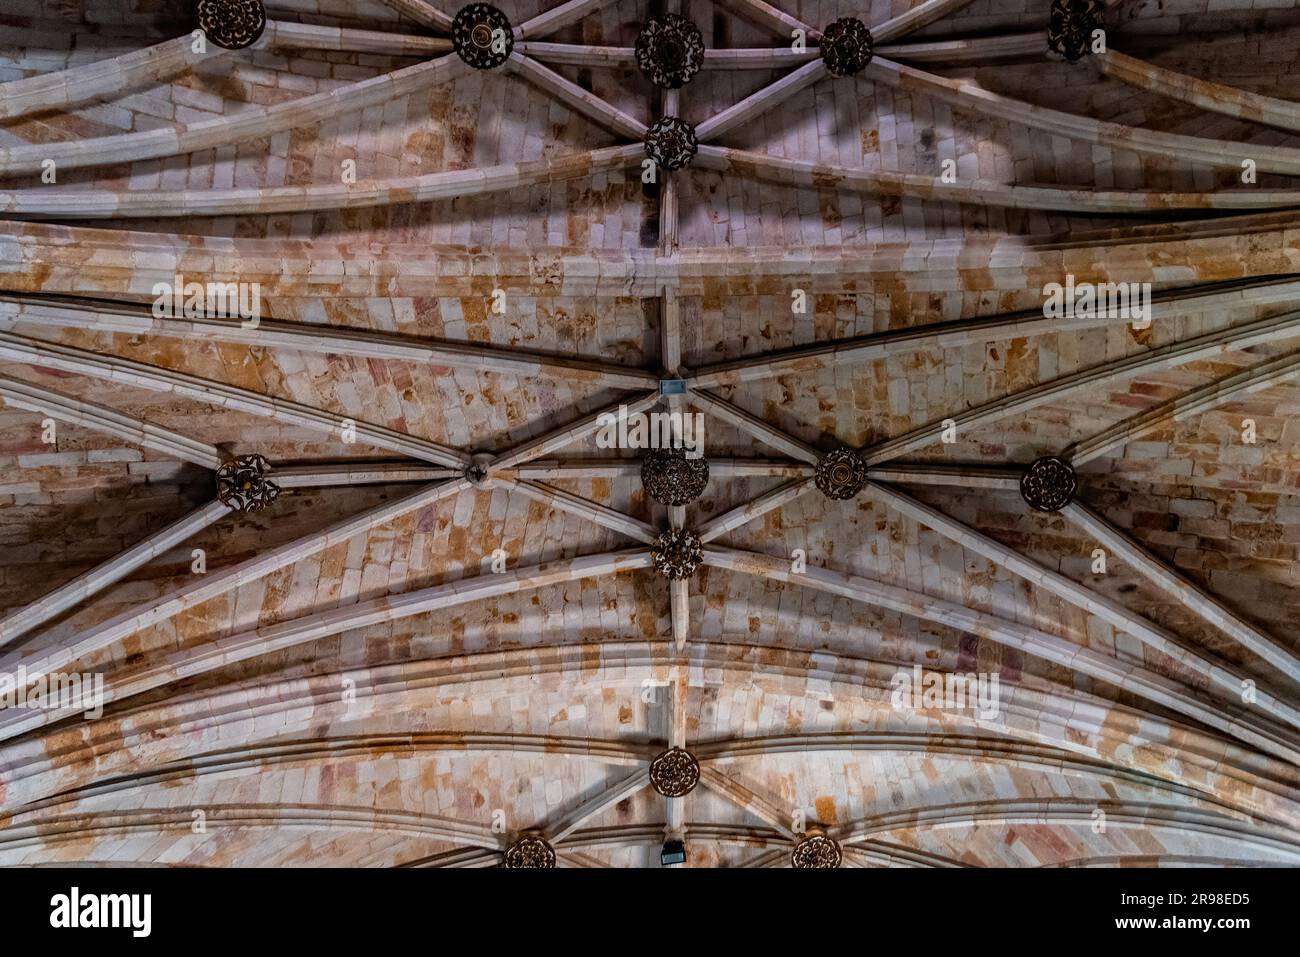 Zamora, Spain - April 7, 2023: Interior view of the Church of San Pedro y San Ildefonso. Directly below view of the vaults Stock Photo